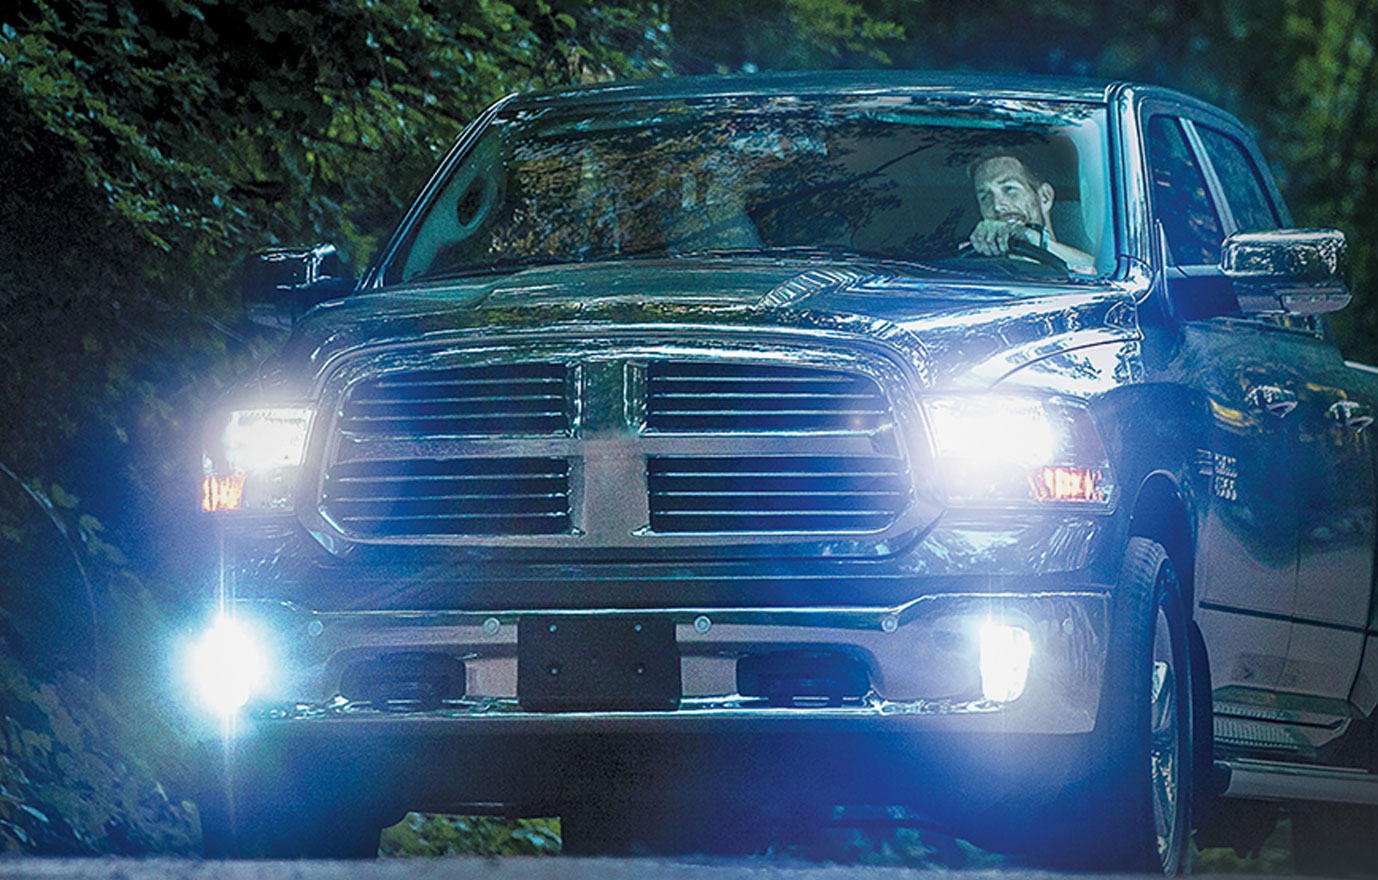 Philips UltinonSport LED - Take your fog lights to the next level